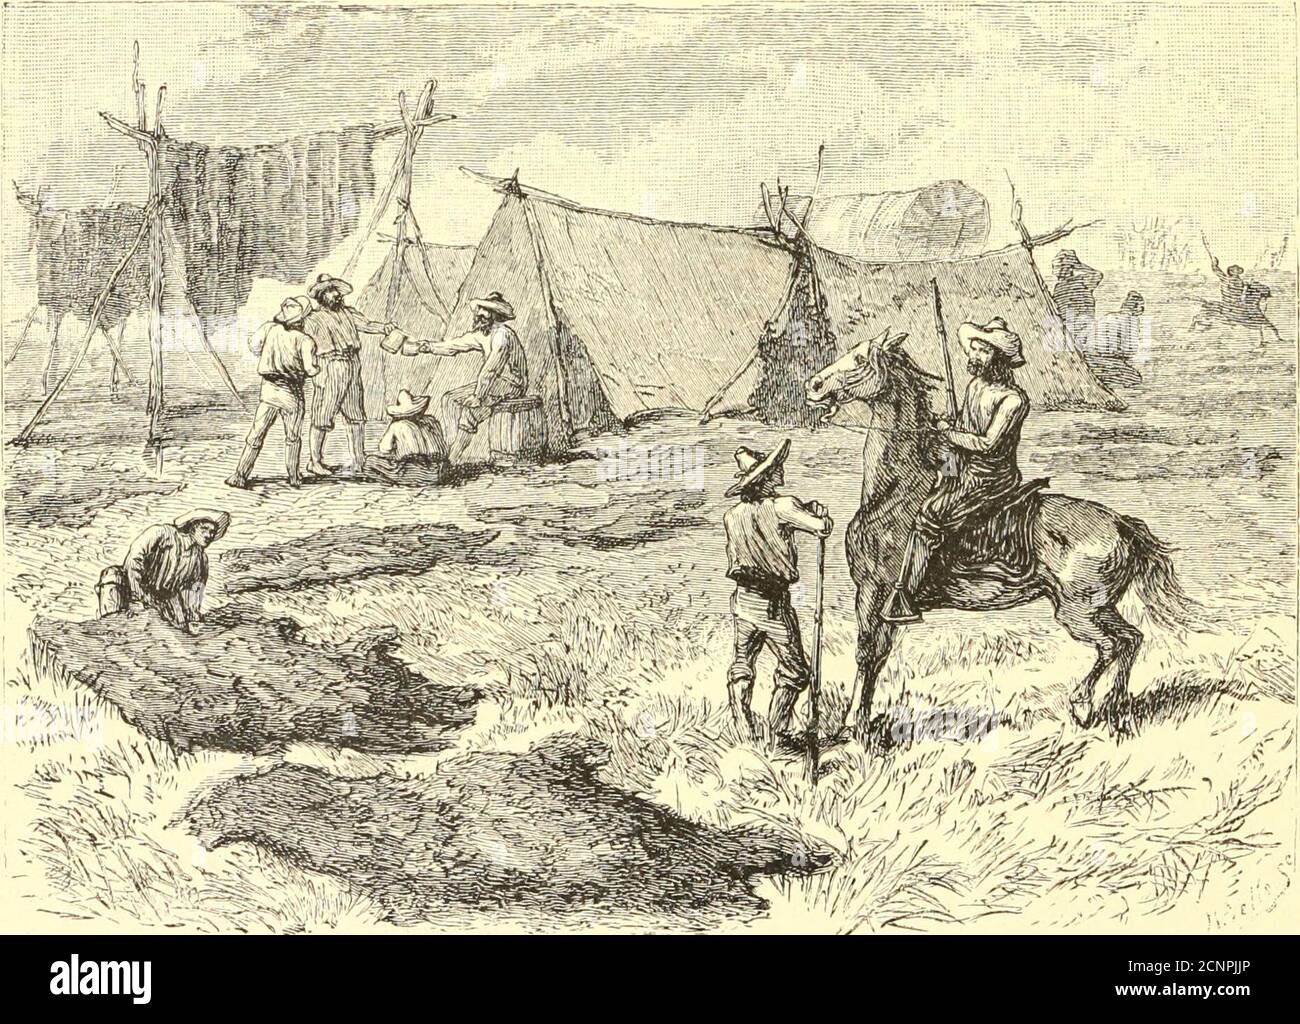 The young Nimrods in North America : a book for boys . VDLTDRE IN A M1KAGE.  222 THE YOUNG K1MKODS. CHAPTER XVIII. MORE BUFFALO-HUNTING.—ENCOUNTER WITH  INDIANS. r I^IIE afternoon was well